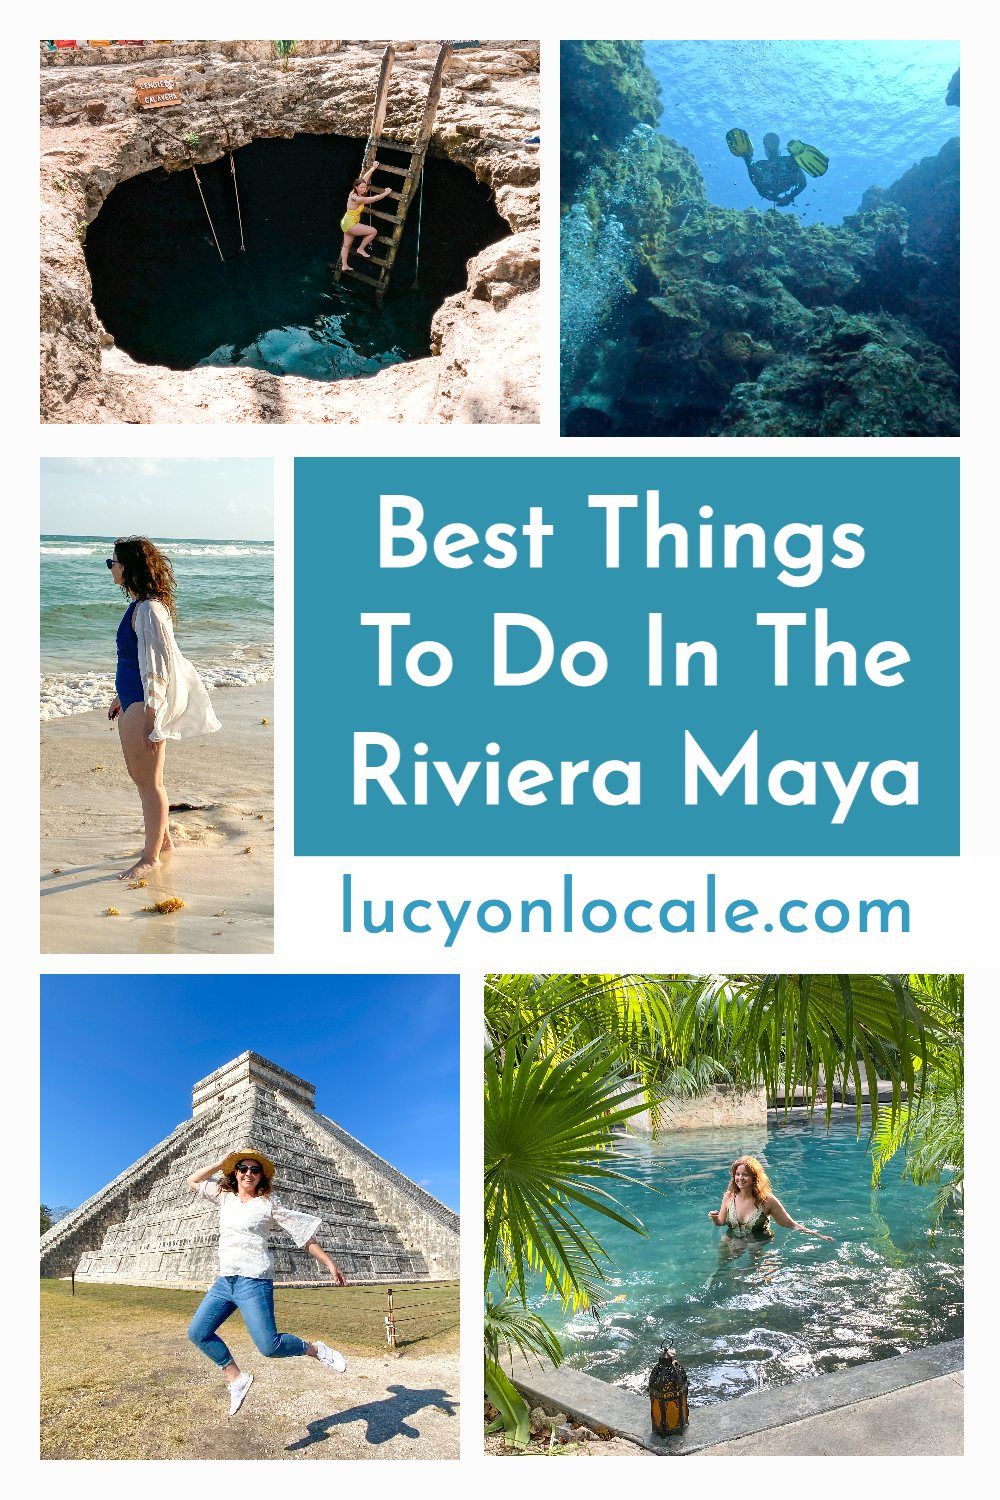 Best Things To Do in The Riviera Maya